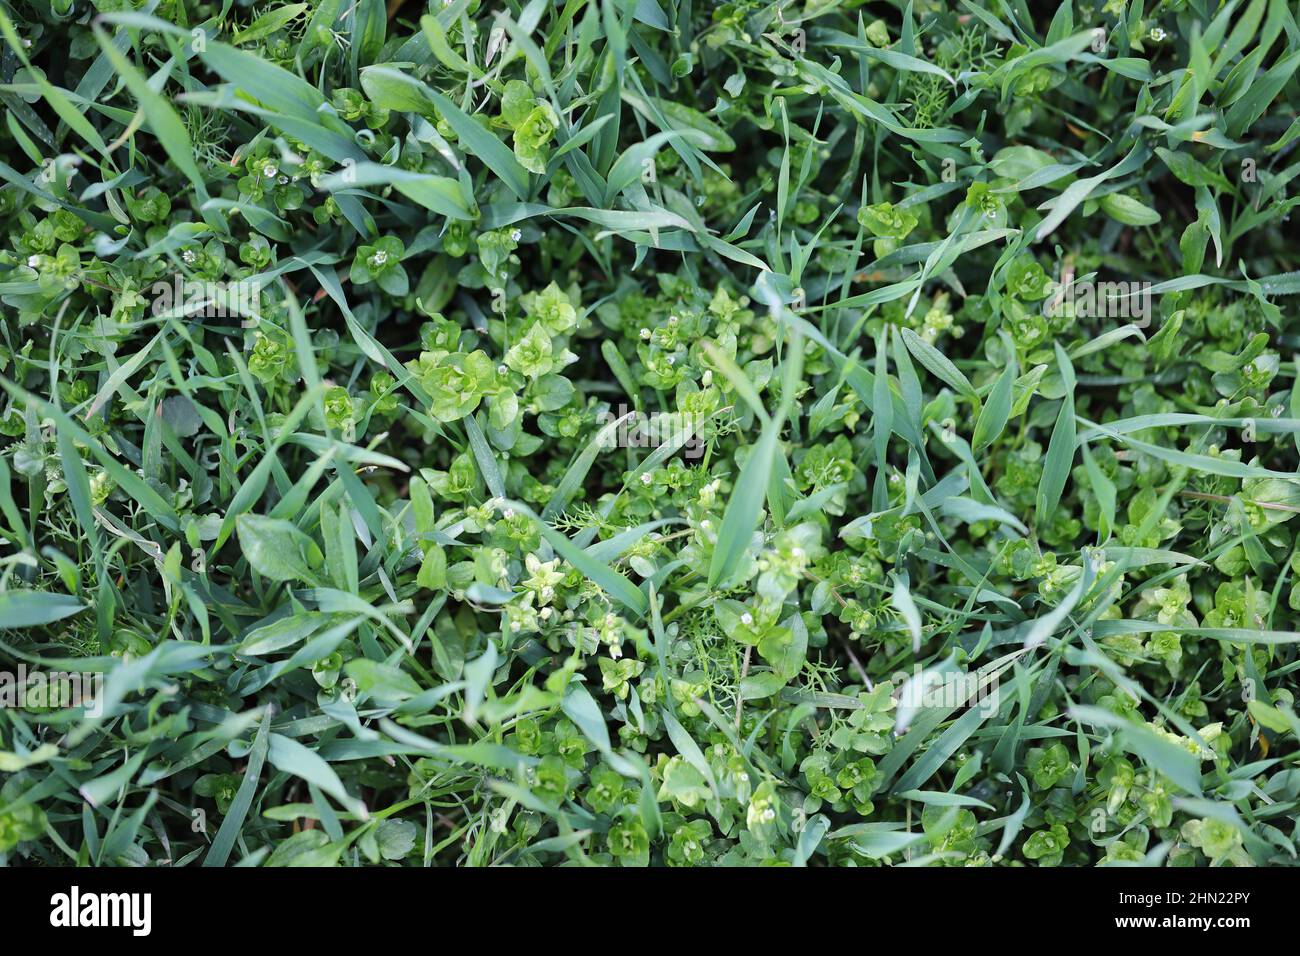 A cereal crop heavily infested with different weed species. Stock Photo